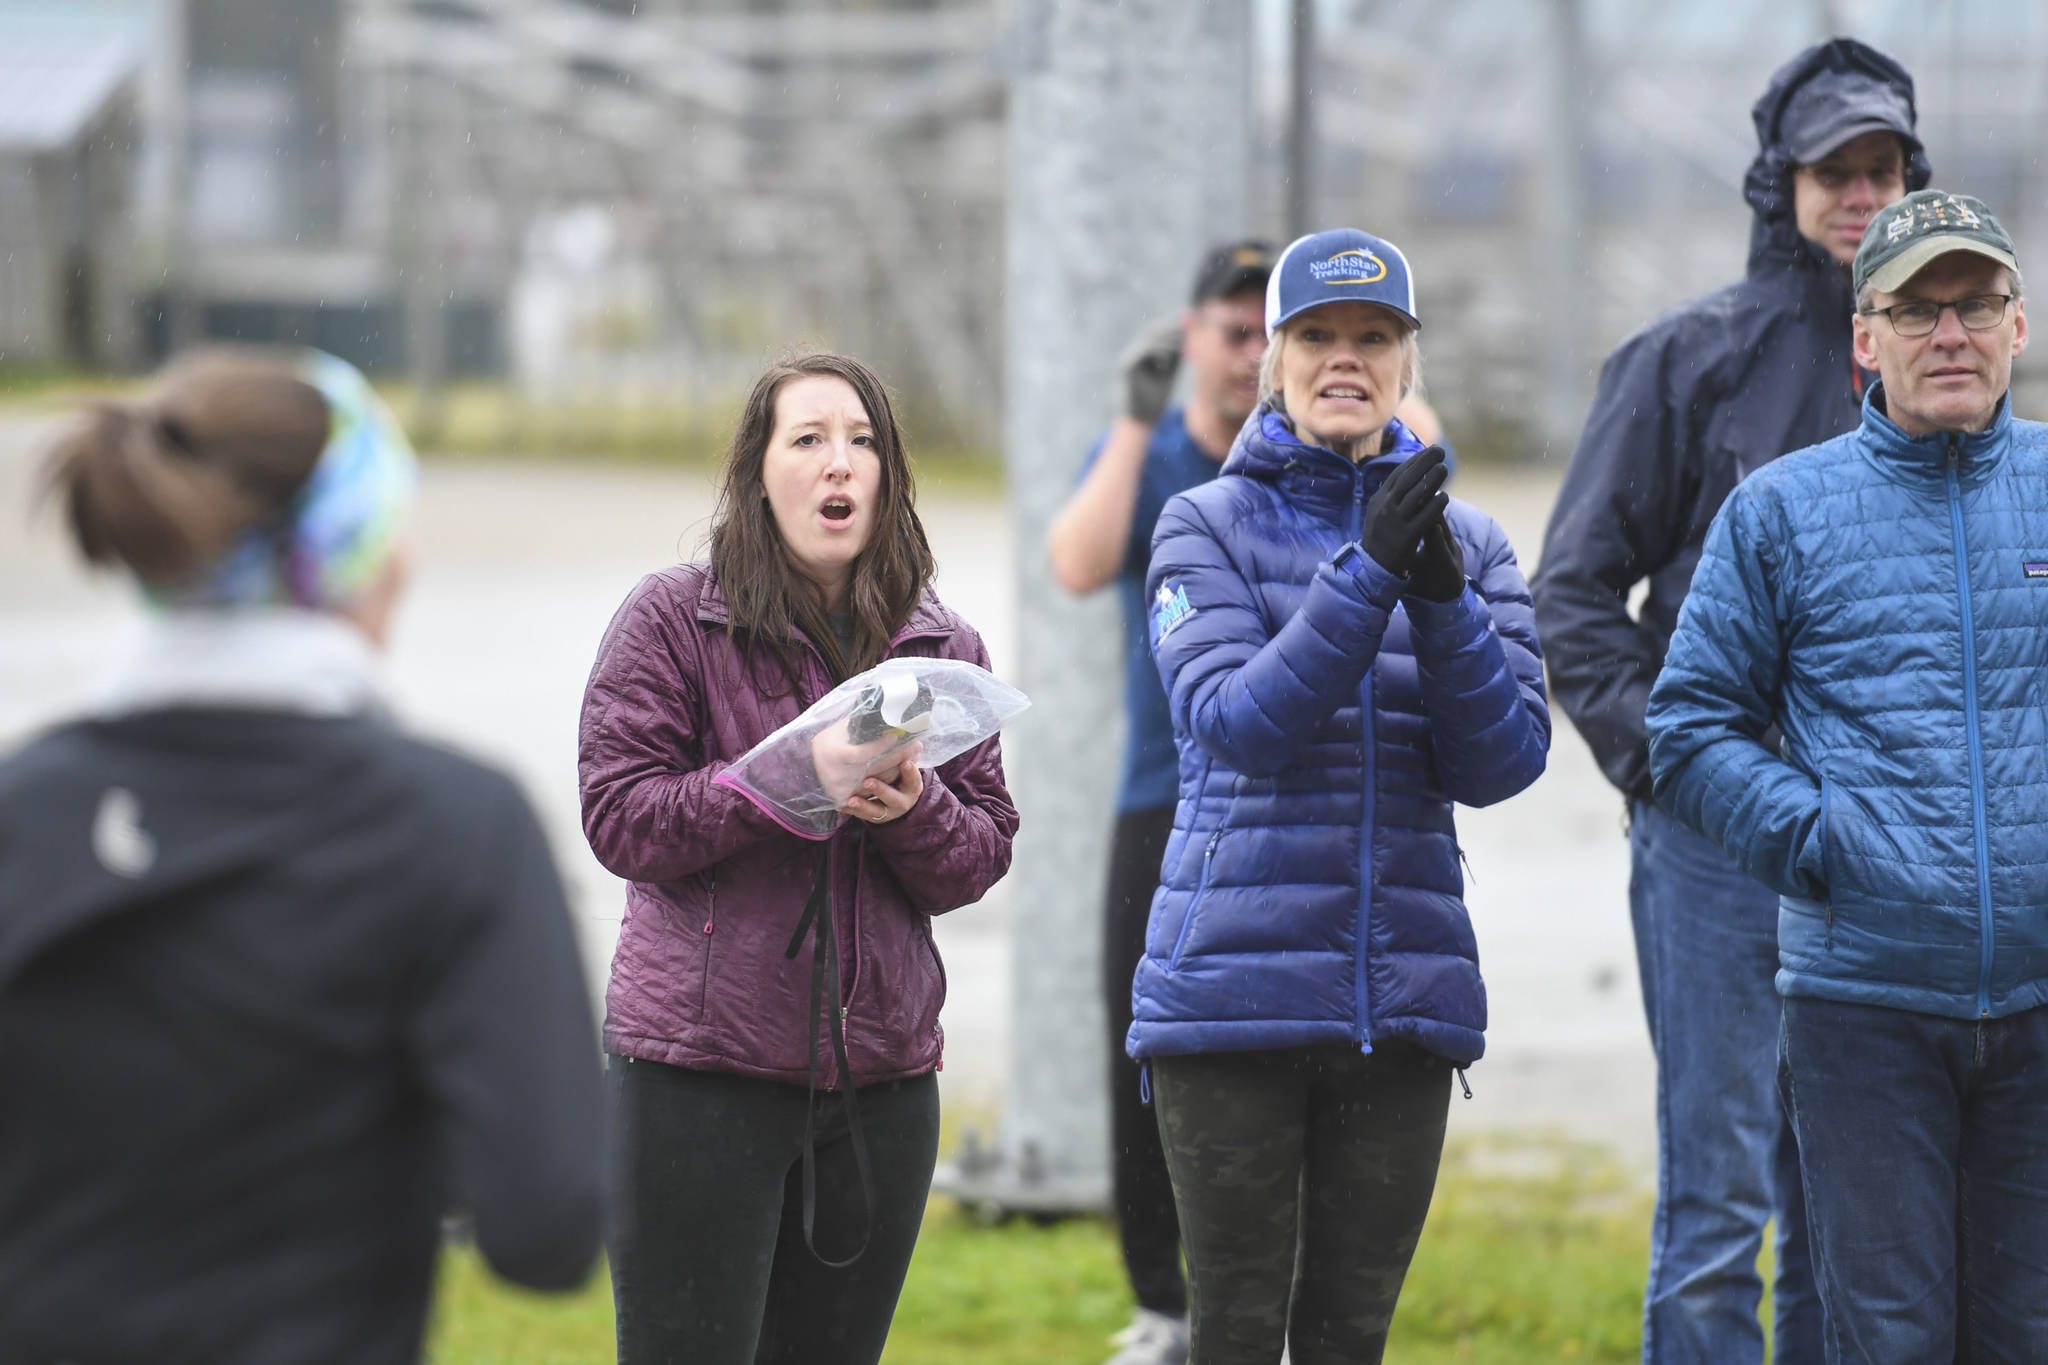 Crystal Bourland, Executive Director of the National Alliance on Mental Illness (NAMI) Juneau, left, cheers and keeps time during the annual community mental health run, the Extra Tough 5K & 1 Mile Run, on Saturday, Oct. 12, 2019, at Riverbend Elementary School. The run is sponsored by National Alliance on Mental Illness (NAMI) Juneau. (Michael Penn | Juneau Empire)